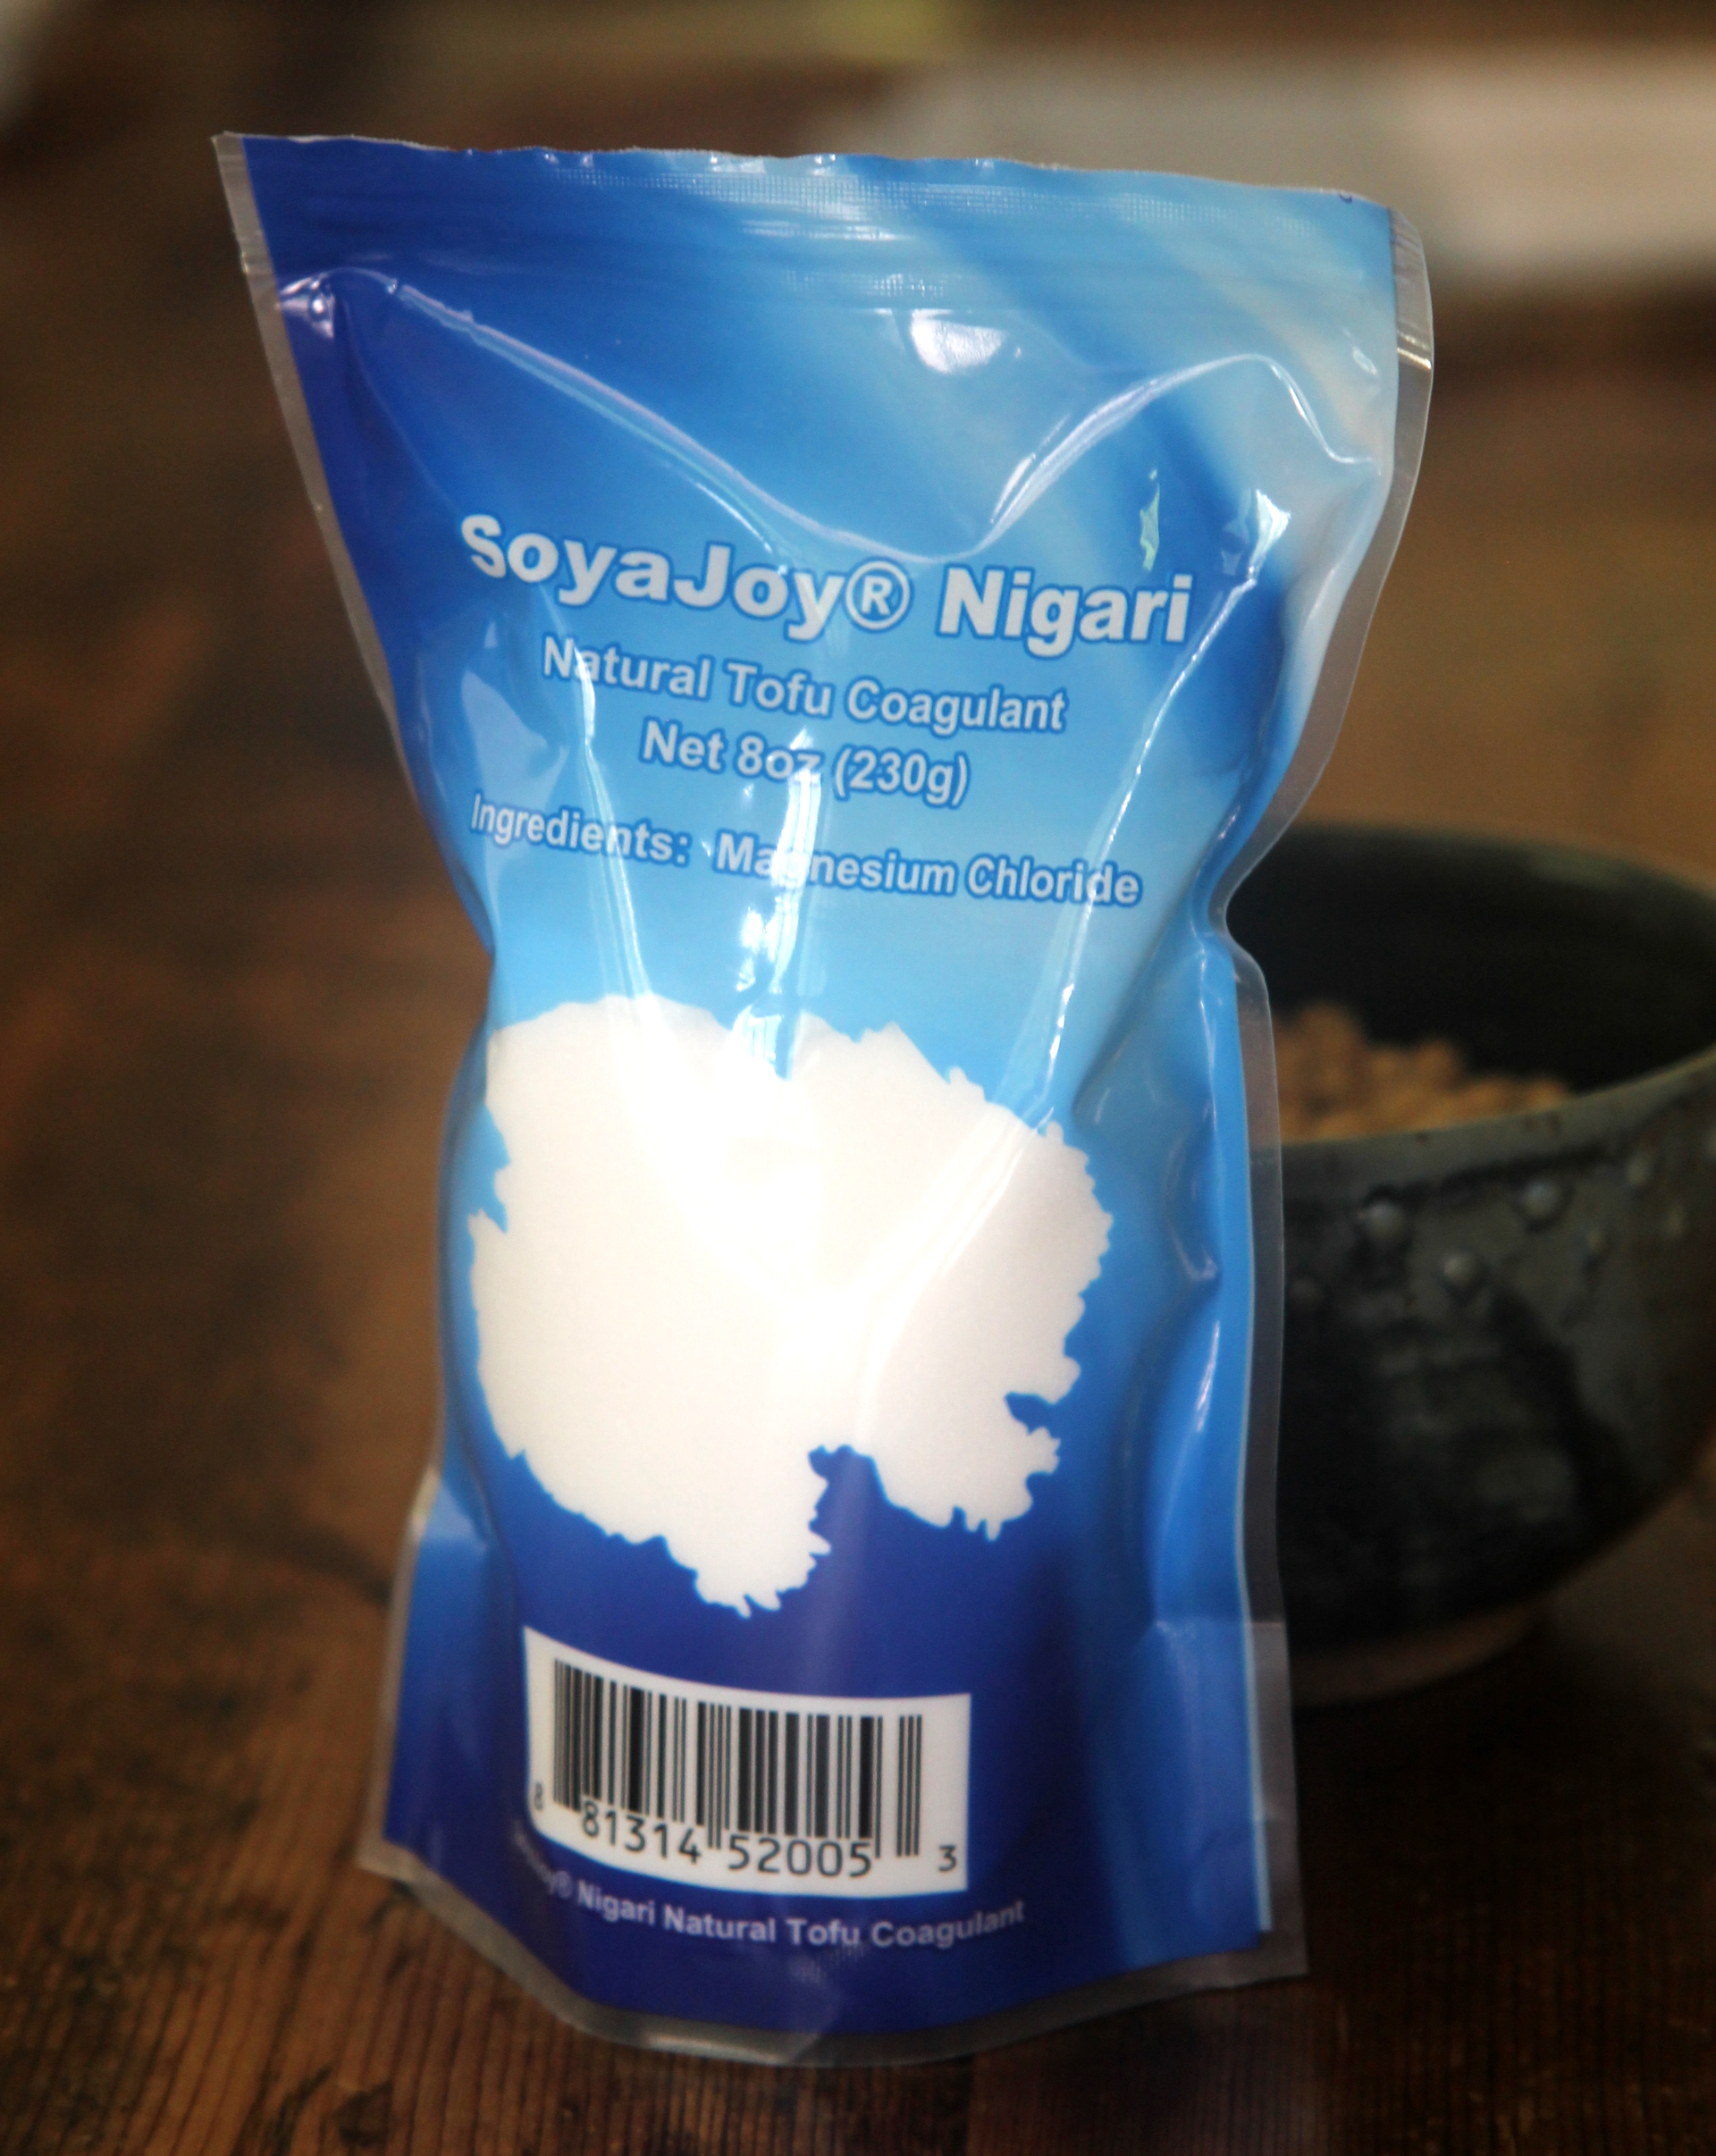 Nigari is the magic that turns soy milk into tofu. It comes in both liquid and powdered forms, but I’ve found that powdered is more widely available.